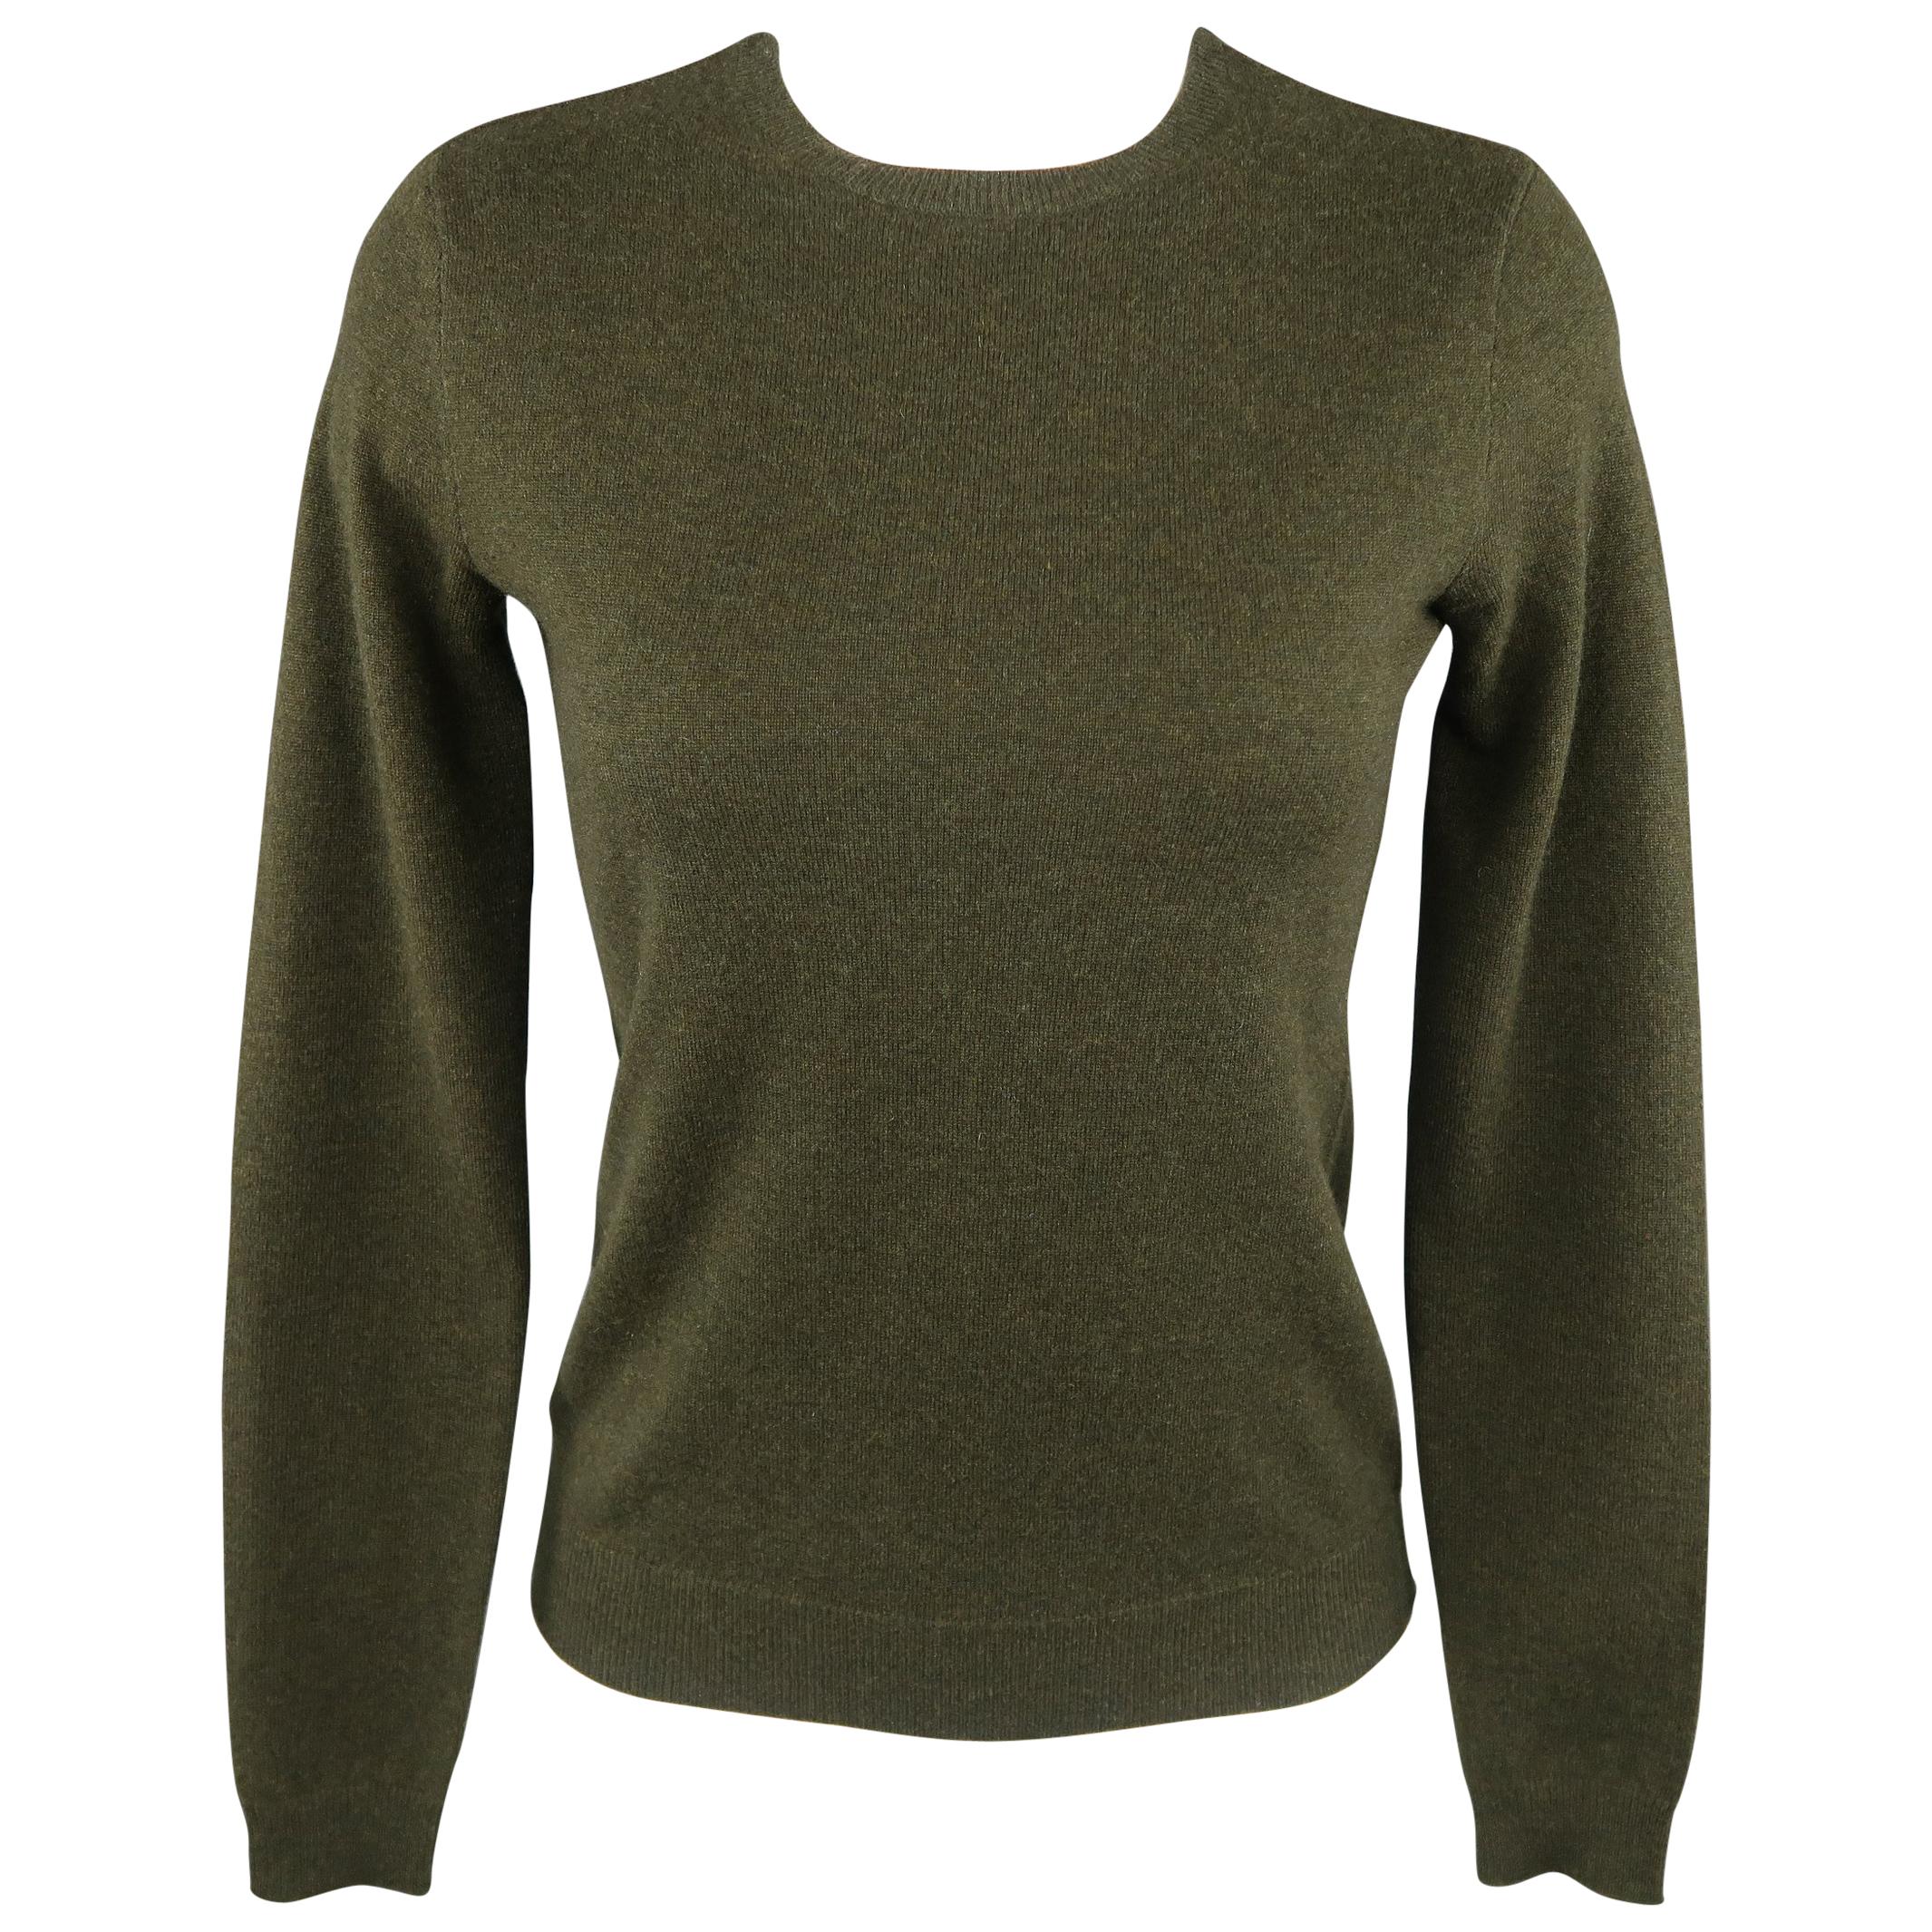 RALPH LAUREN Size S Olive Green Cashmere Crewneck Pullover Sweater